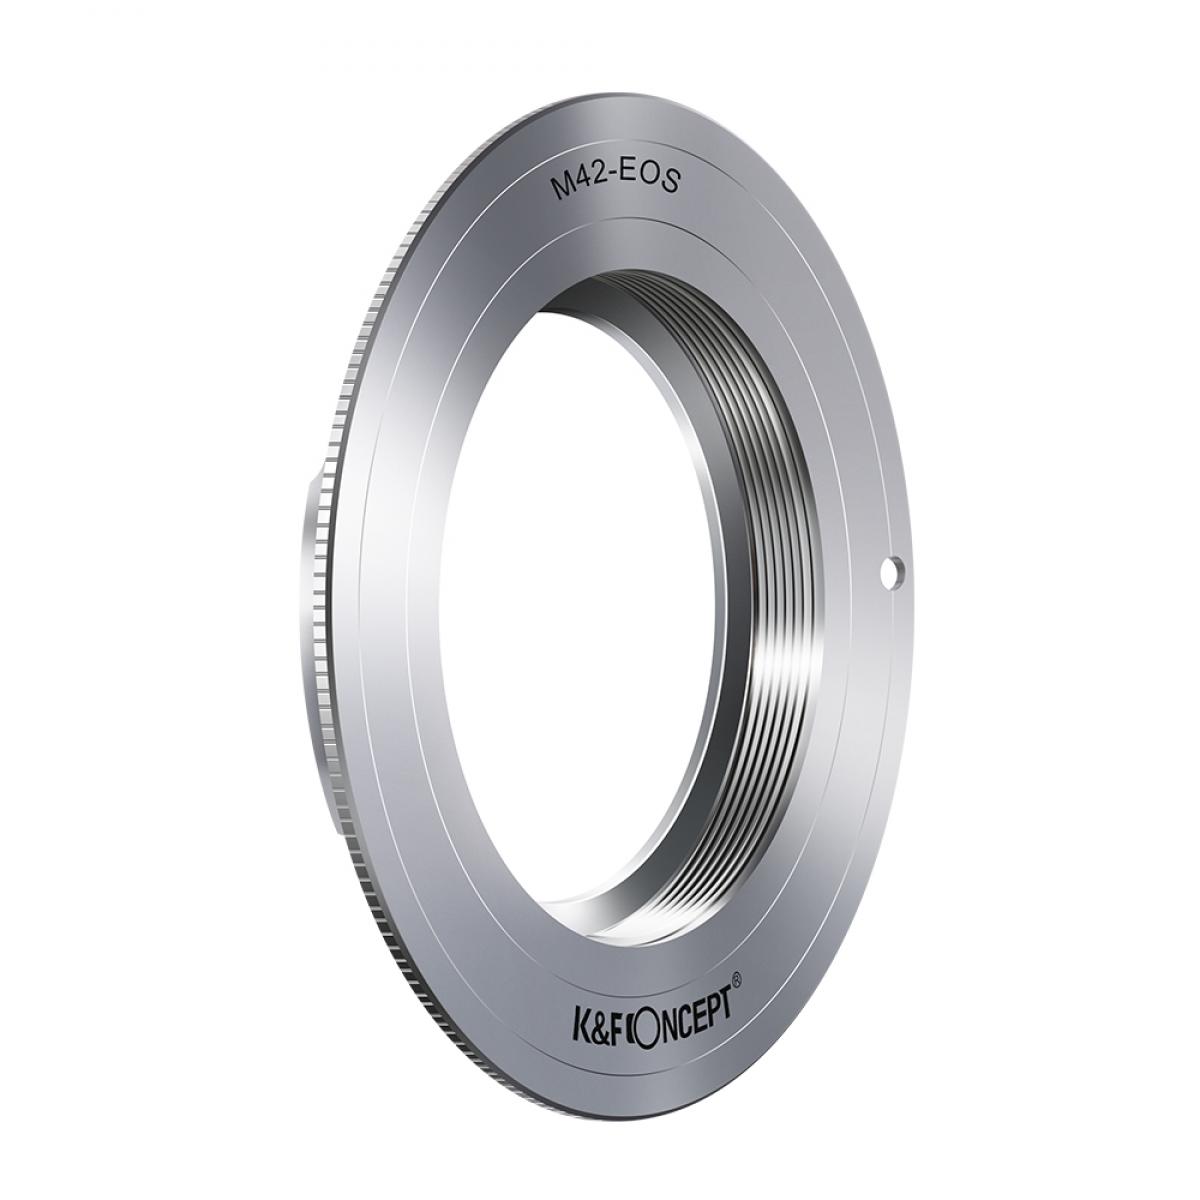 K&F Concept Lens Adapter KF06.148 for M42 - EOS